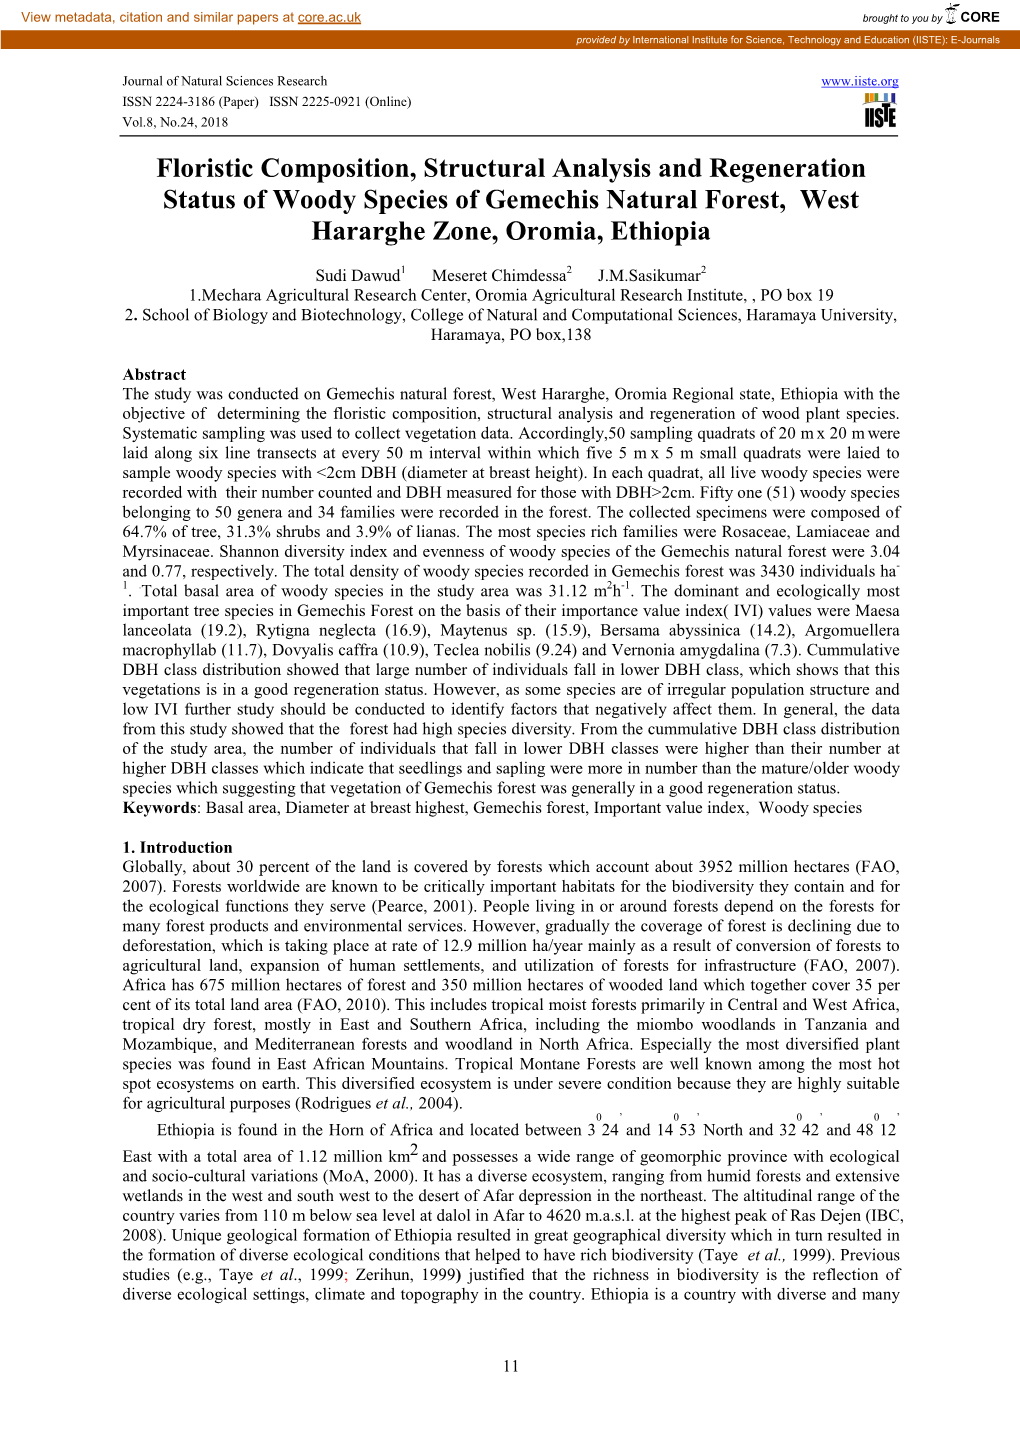 Floristic Composition, Structural Analysis and Regeneration Status of Woody Species of Gemechis Natural Forest, West Hararghe Zone, Oromia, Ethiopia